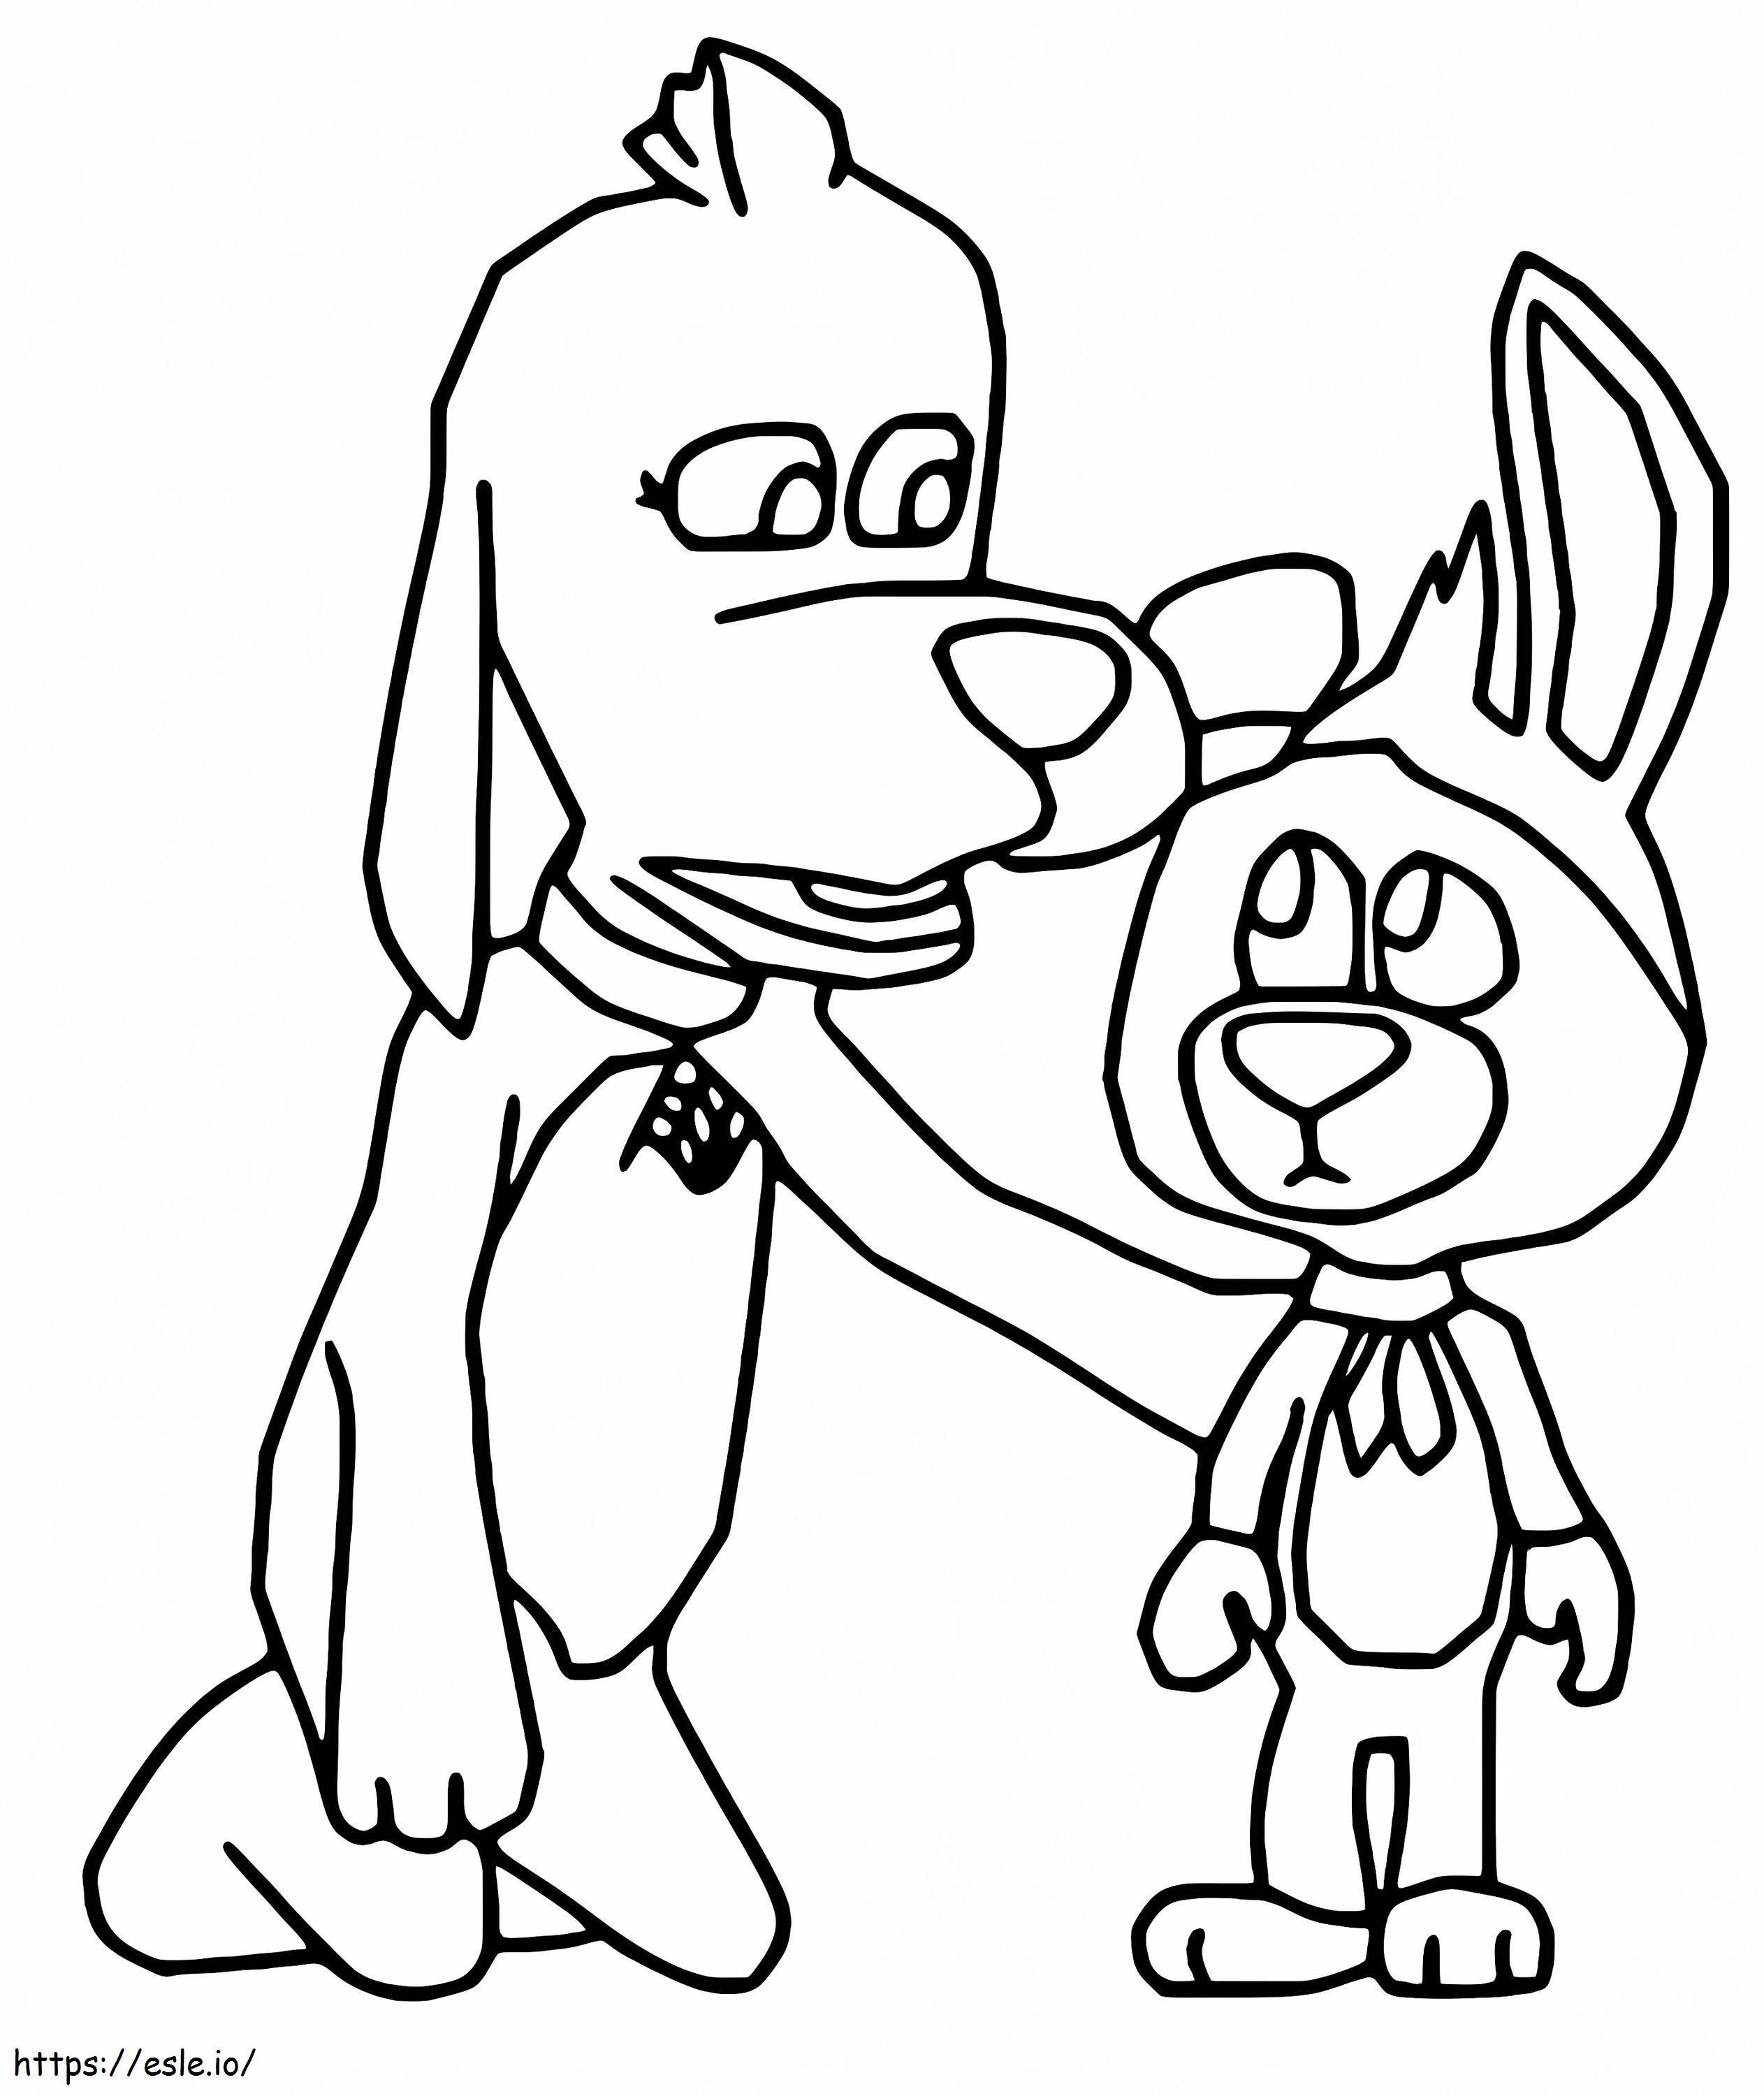 Scooch Pooch And Tag Barker coloring page